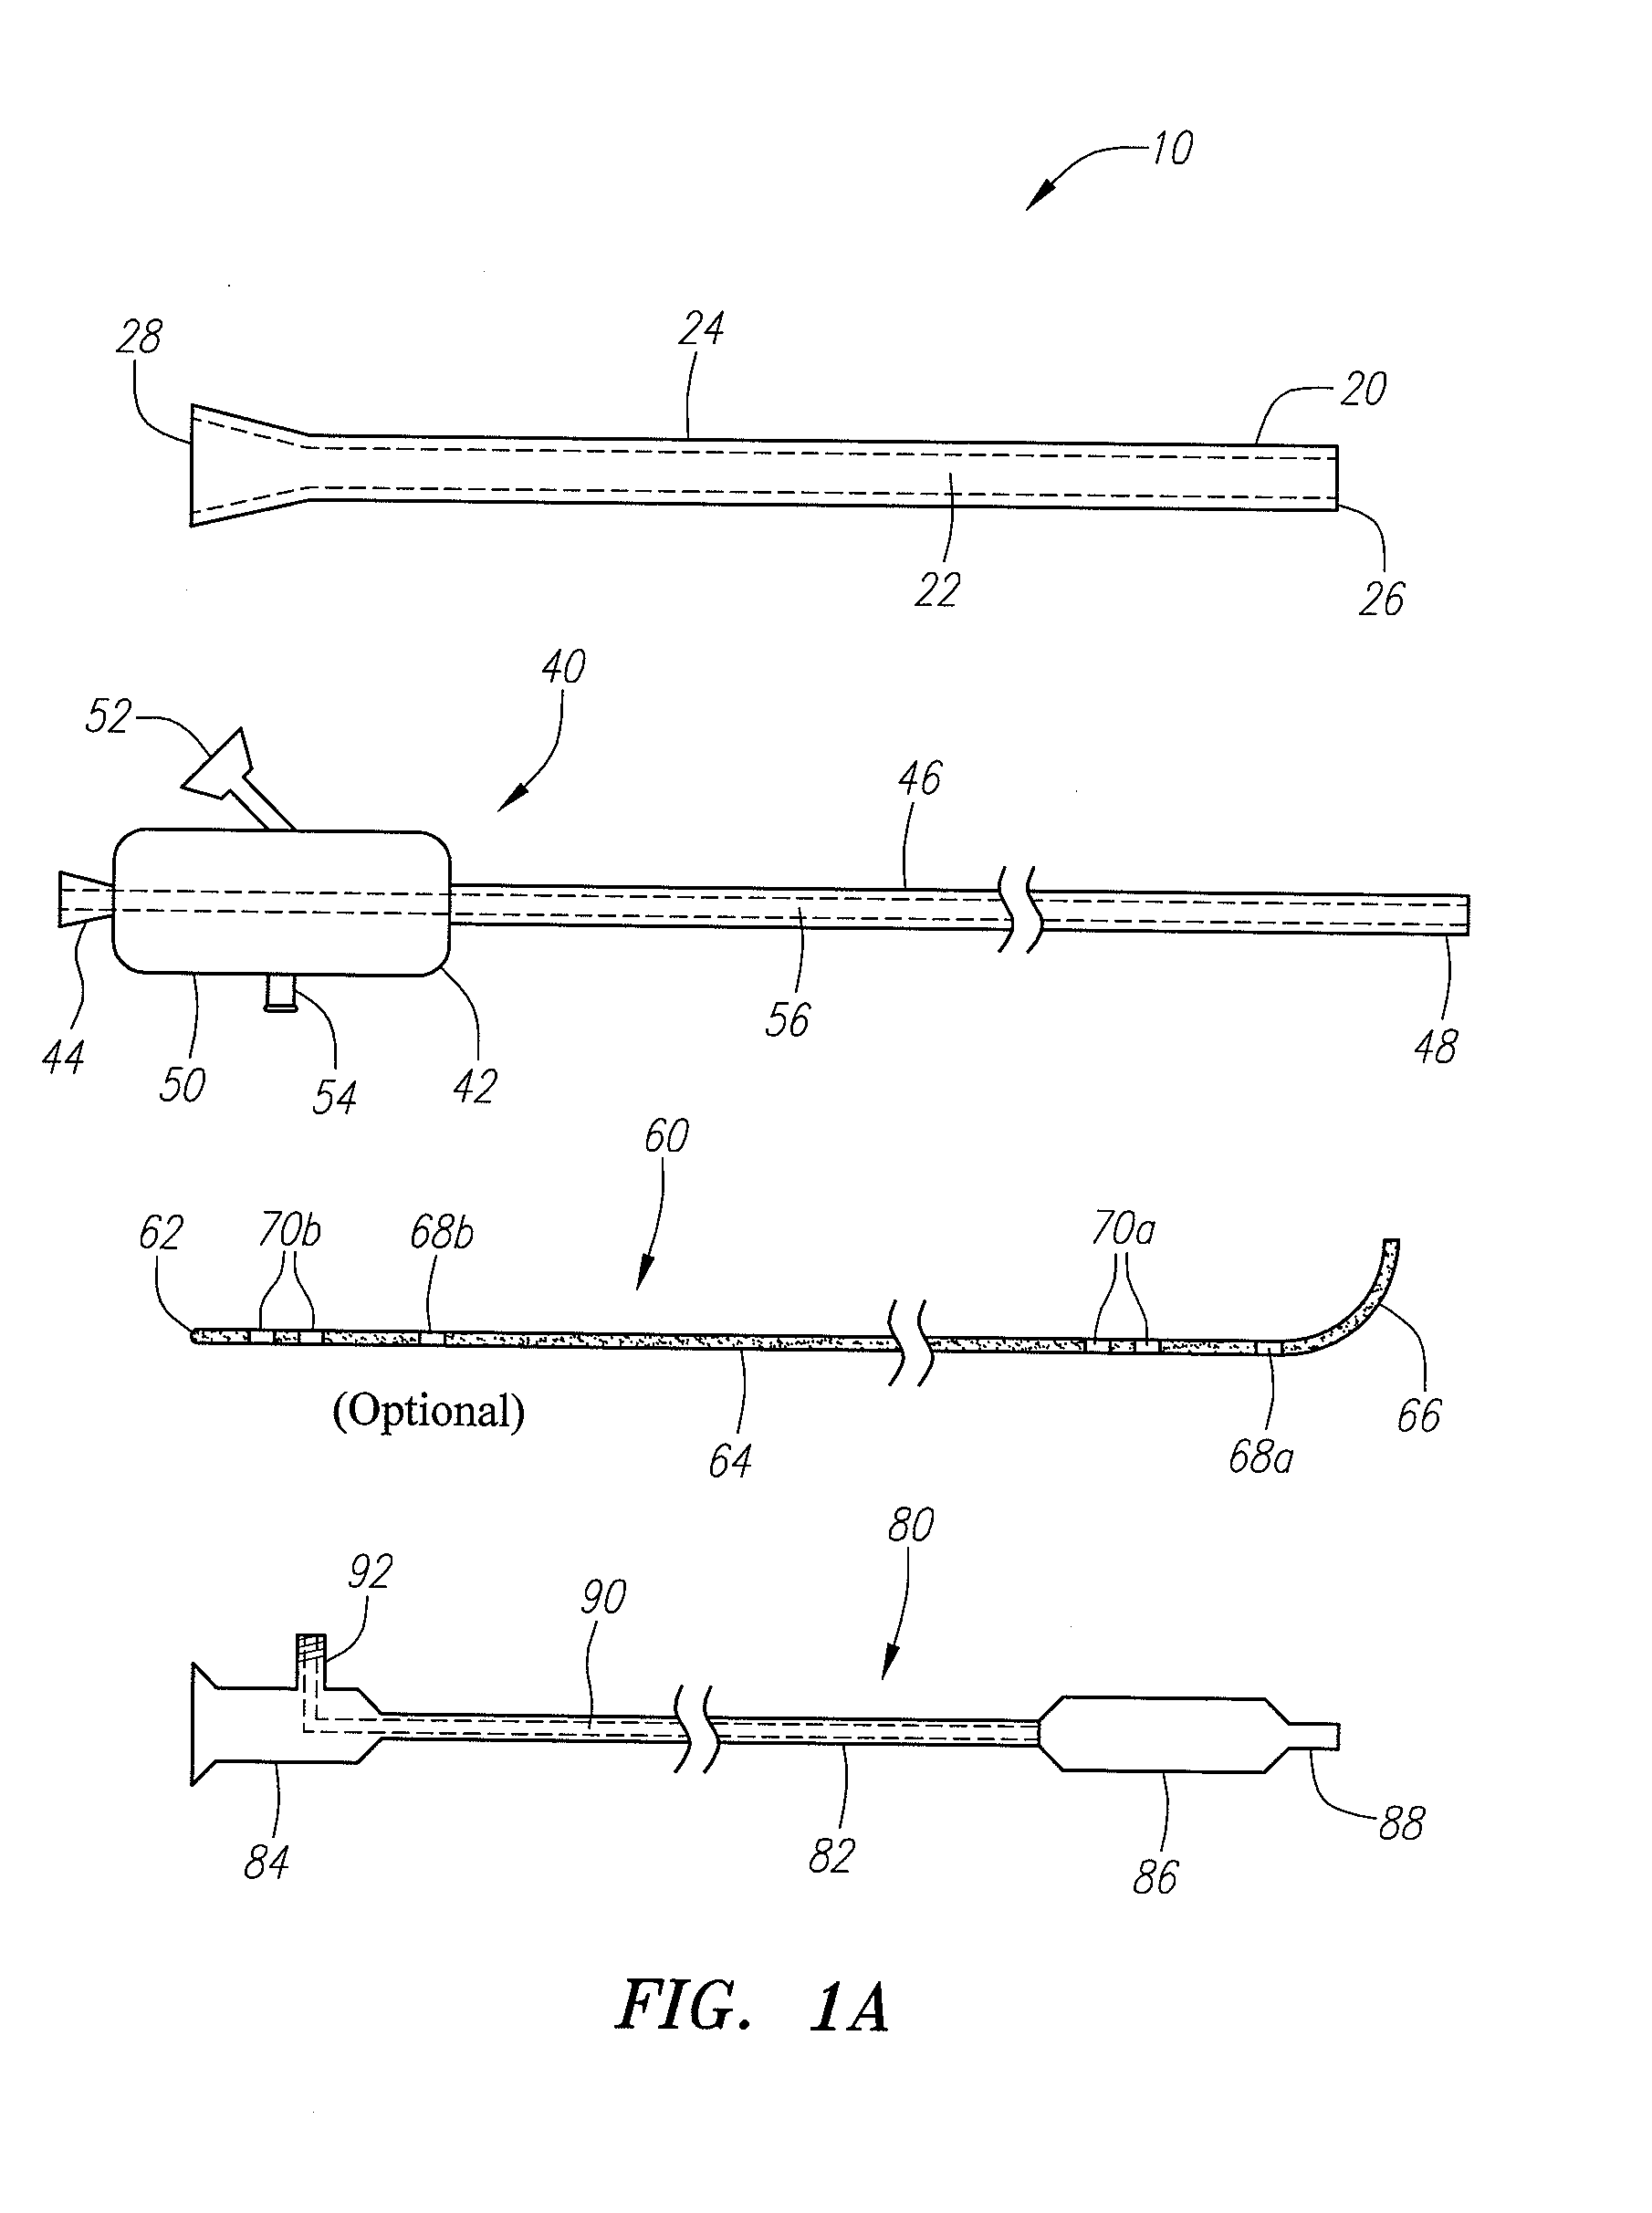 Apparatus and method for treatment of sinusitis